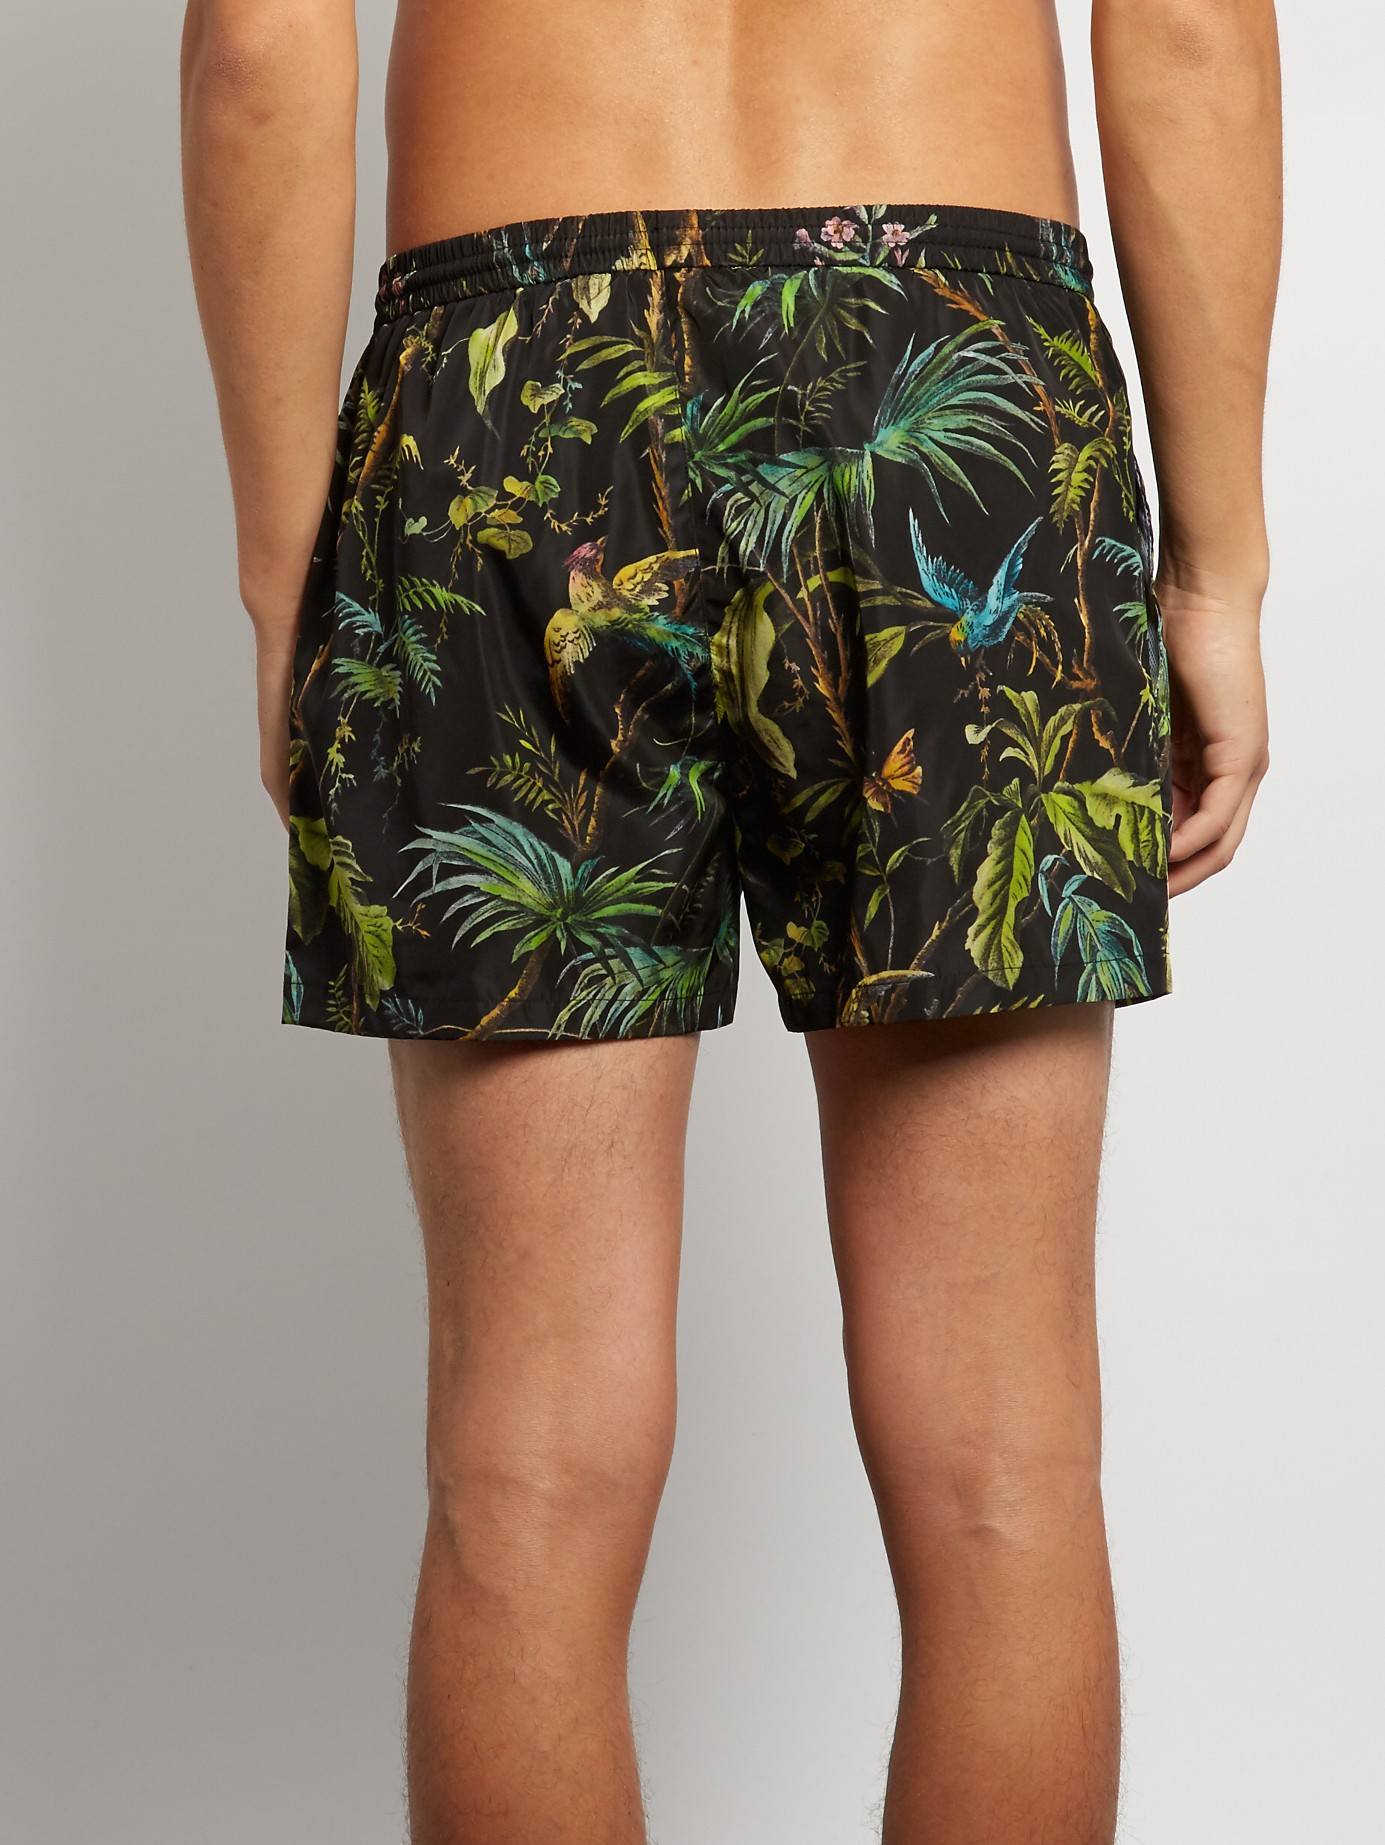 Gucci Tropical-print Swim Shorts in Green for Men - Lyst